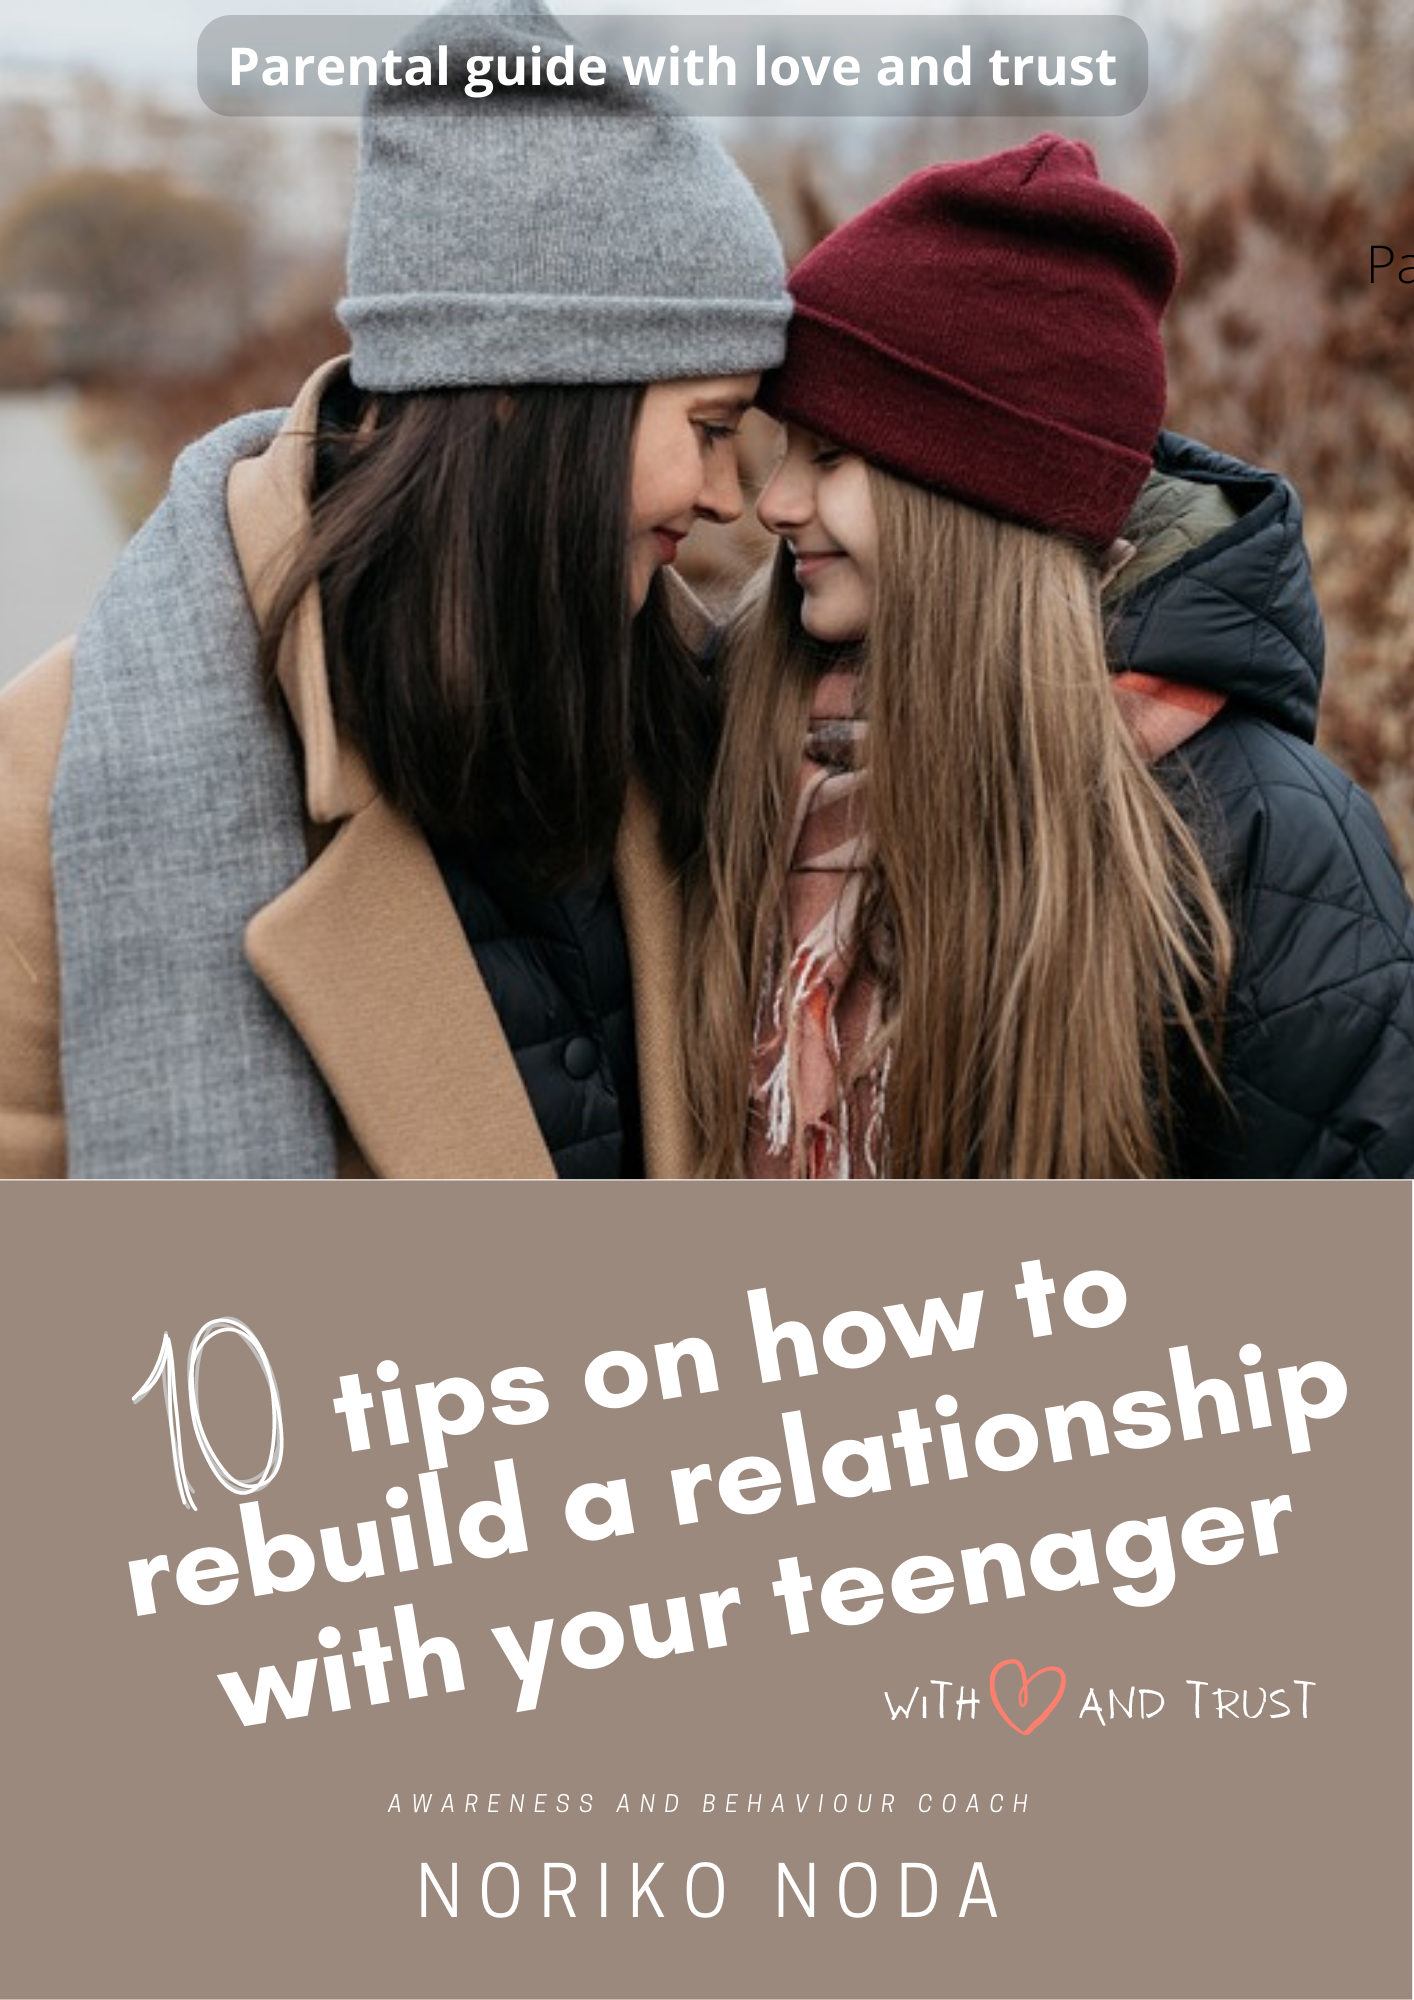 10 tips on how to rebuild a relationship with your teenager